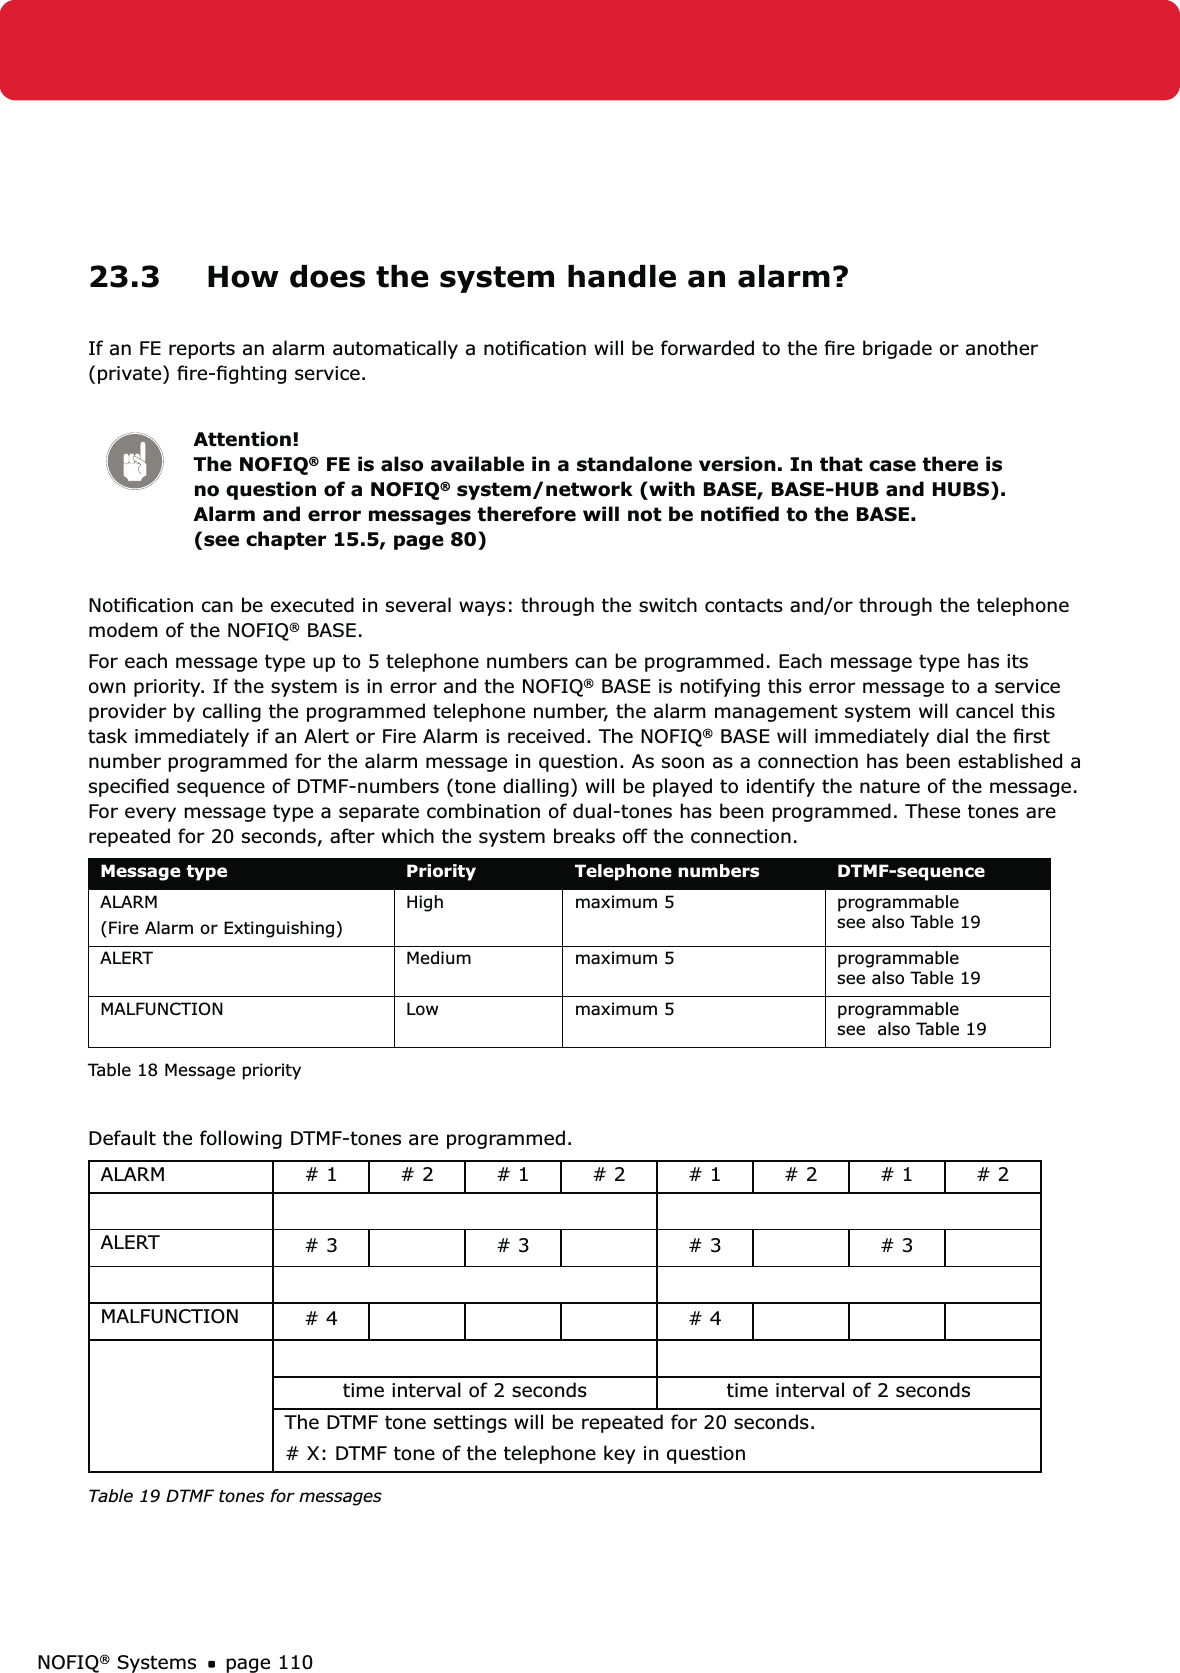 NOFIQ® Systems page 11023.3  How does the system handle an alarm?If an FE reports an alarm automatically a notiﬁcation will be forwarded to the ﬁre brigade or another (private) ﬁre-ﬁghting service.Attention! The NOFIQ® FE is also available in a standalone version. In that case there is no question of a NOFIQ® system/network (with BASE, BASE-HUB and HUBS). Alarm and error messages therefore will not be notiﬁed to the BASE.  (see chapter 15.5, page 80)Notiﬁcation can be executed in several ways: through the switch contacts and/or through the telephone modem of the NOFIQ® BASE.For each message type up to 5 telephone numbers can be programmed. Each message type has its own priority. If the system is in error and the NOFIQ® BASE is notifying this error message to a service provider by calling the programmed telephone number, the alarm management system will cancel this task immediately if an Alert or Fire Alarm is received. The NOFIQ® BASE will immediately dial the ﬁrst number programmed for the alarm message in question. As soon as a connection has been established a speciﬁed sequence of DTMF-numbers (tone dialling) will be played to identify the nature of the message. For every message type a separate combination of dual-tones has been programmed. These tones are repeated for 20 seconds, after which the system breaks off the connection.Message type Priority Telephone numbers DTMF-sequenceALARM (Fire Alarm or Extinguishing)High maximum 5 programmable see also Table 19ALERT Medium maximum 5 programmable see also Table 19MALFUNCTION Low maximum 5 programmable see  also Table 19Table 18 Message priorityDefault the following DTMF-tones are programmed.ALARM # 1 # 2 # 1 # 2 # 1 # 2 # 1 # 2ALERT # 3 # 3 # 3 # 3MALFUNCTION # 4 # 4time interval of 2 seconds time interval of 2 secondsThe DTMF tone settings will be repeated for 20 seconds.# X: DTMF tone of the telephone key in questionTable 19 DTMF tones for messages